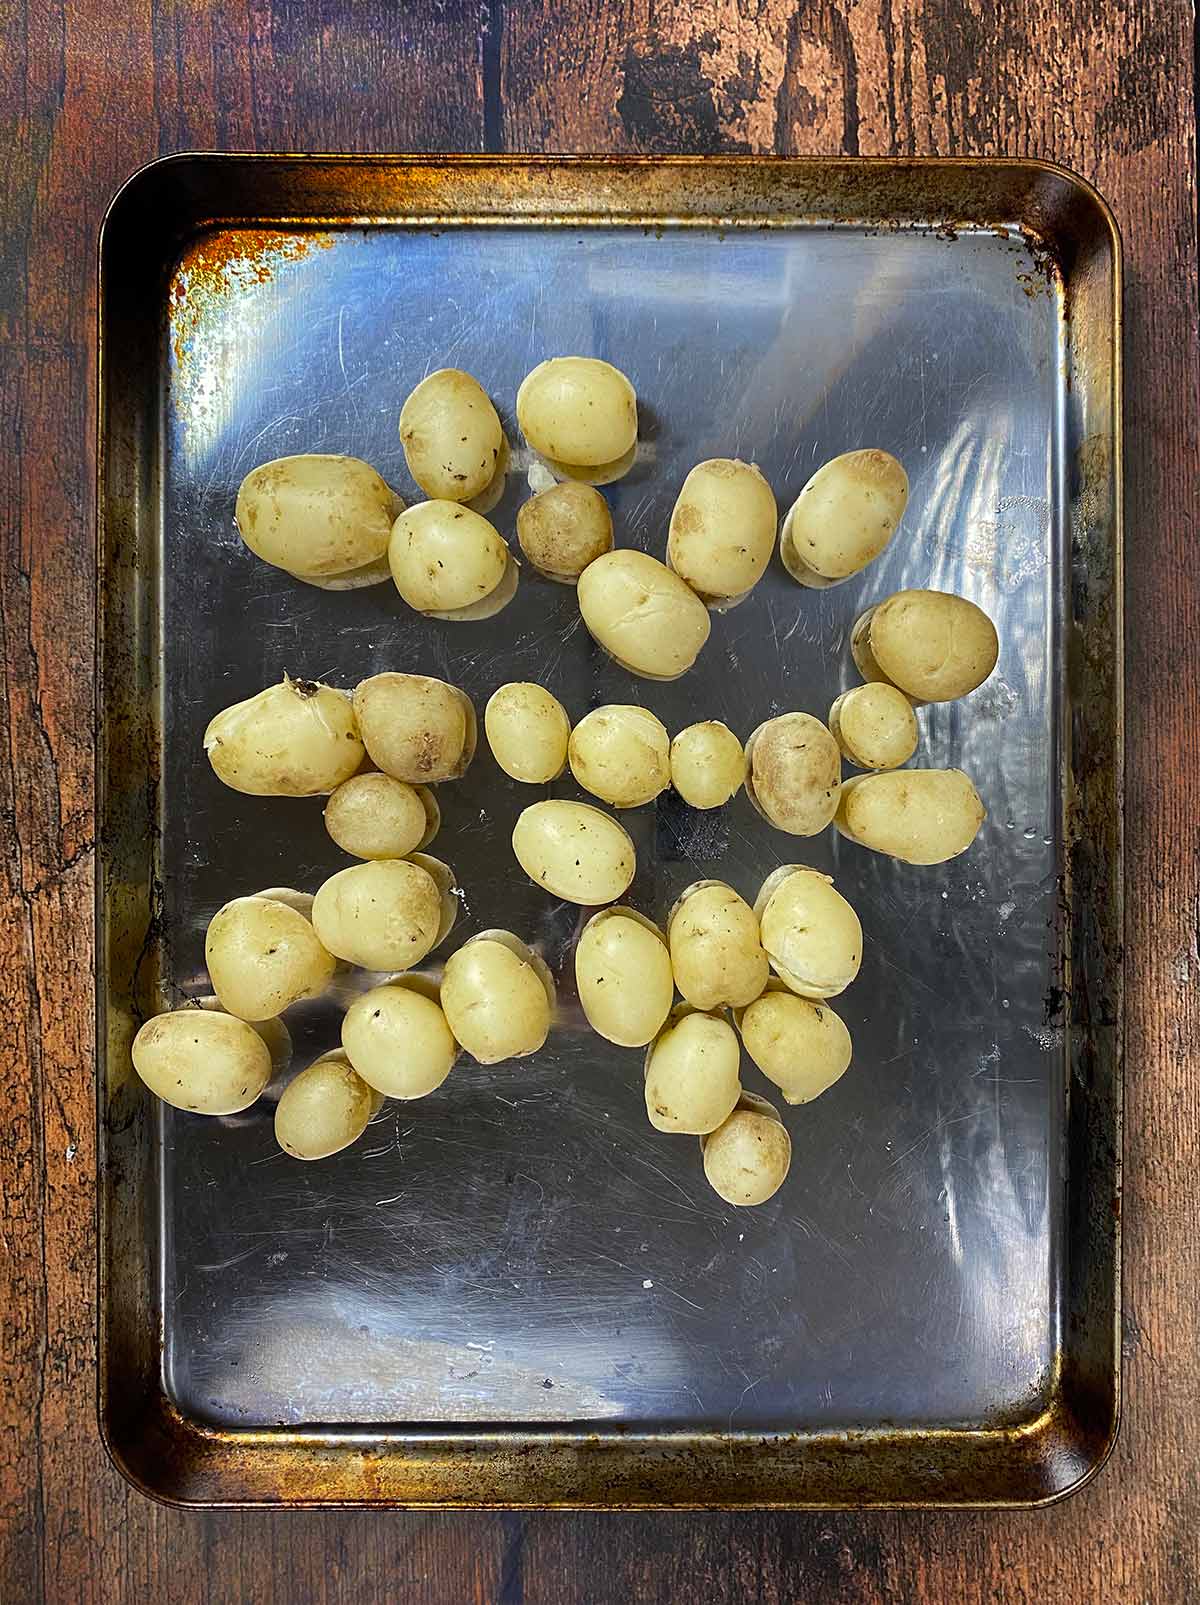 A baking tray with par-boiled new potatoes on it.